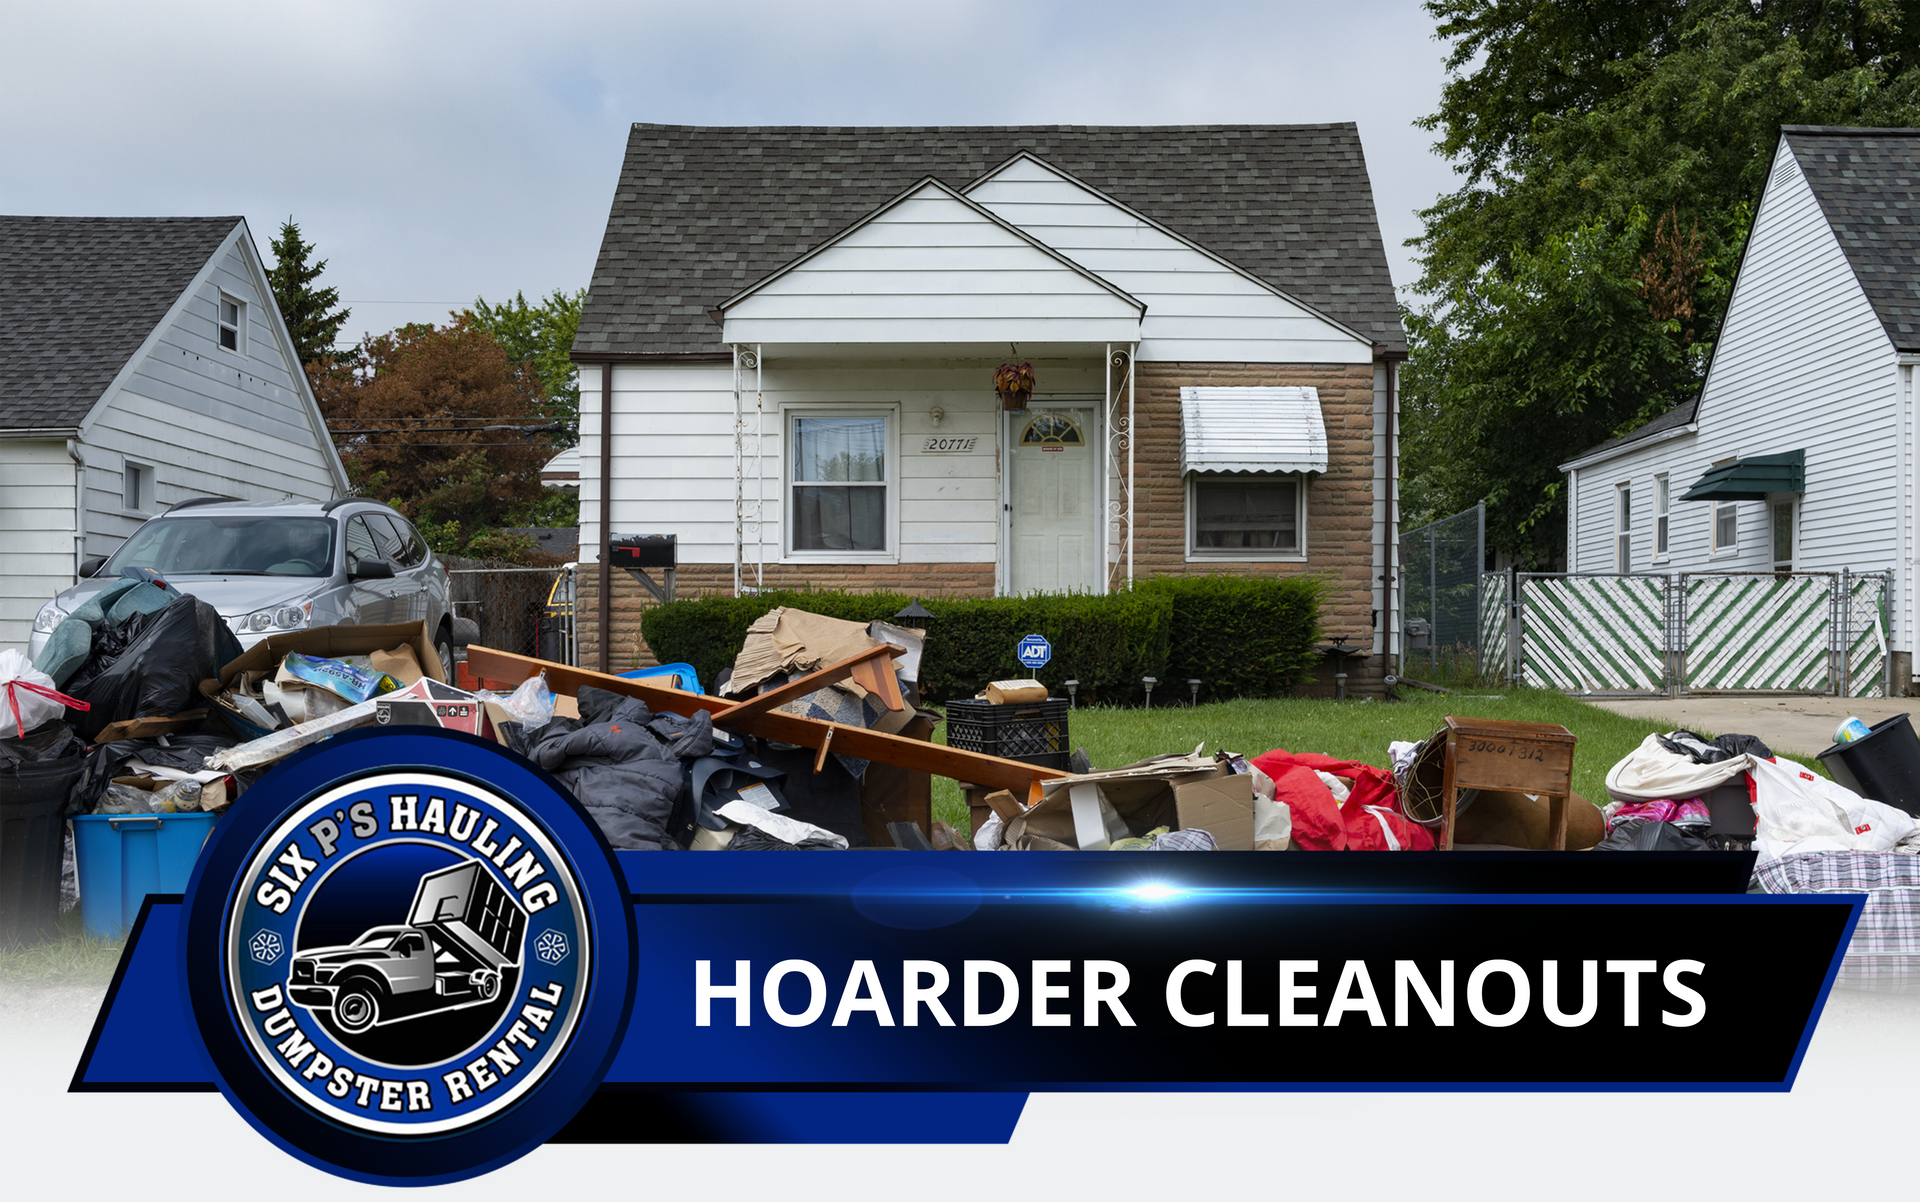 Hoarder Cleanouts in La Verne, CA